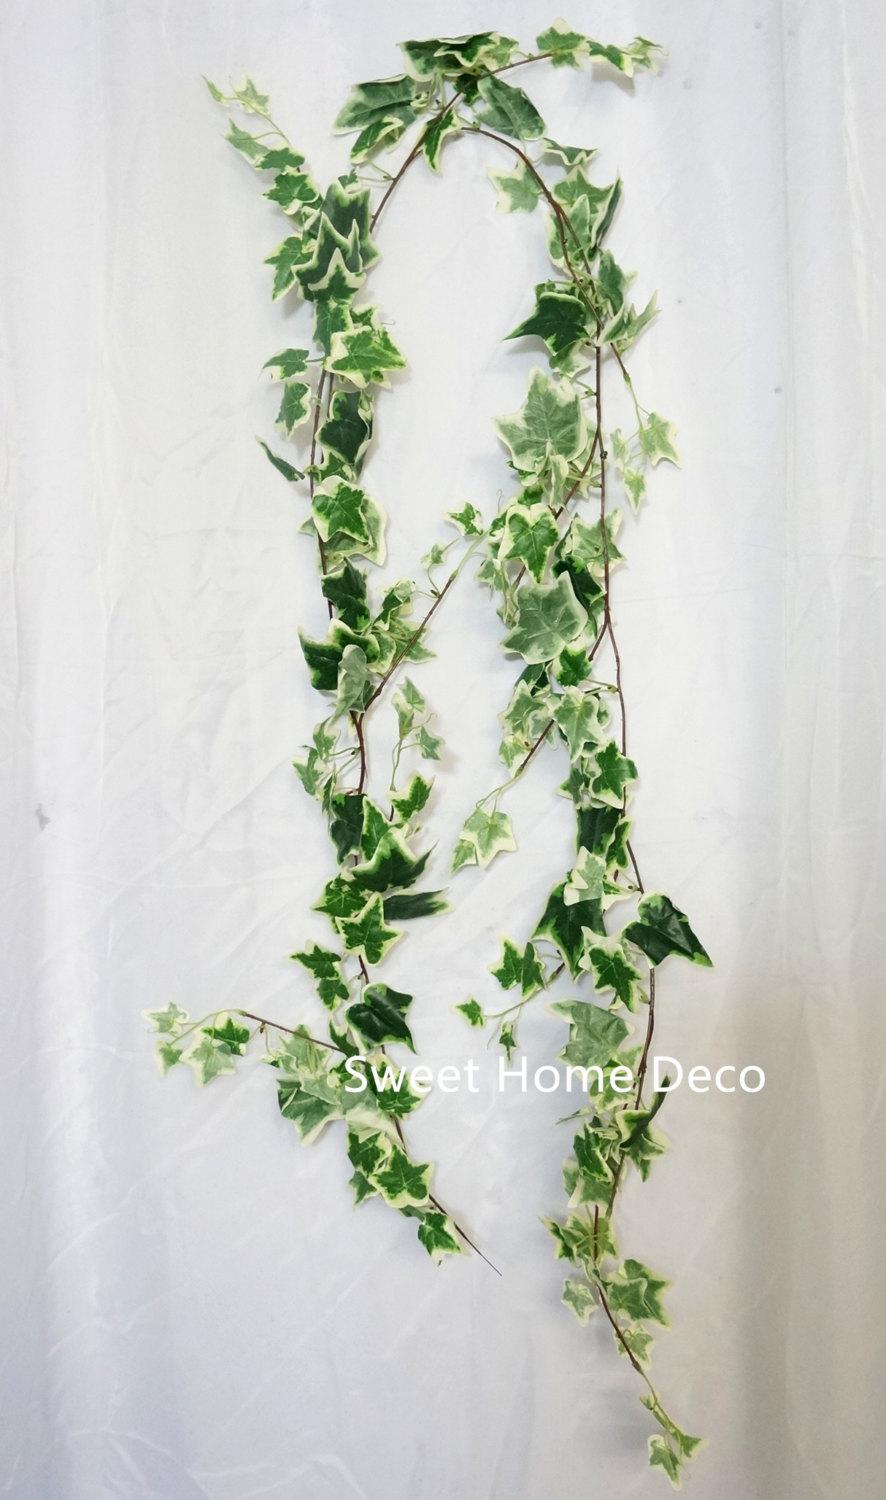 Mariage - JennysFloweShop 6'L Silk Ivy Artificial Garland Greener Leaves Garland Party/Home Decorations Green/White